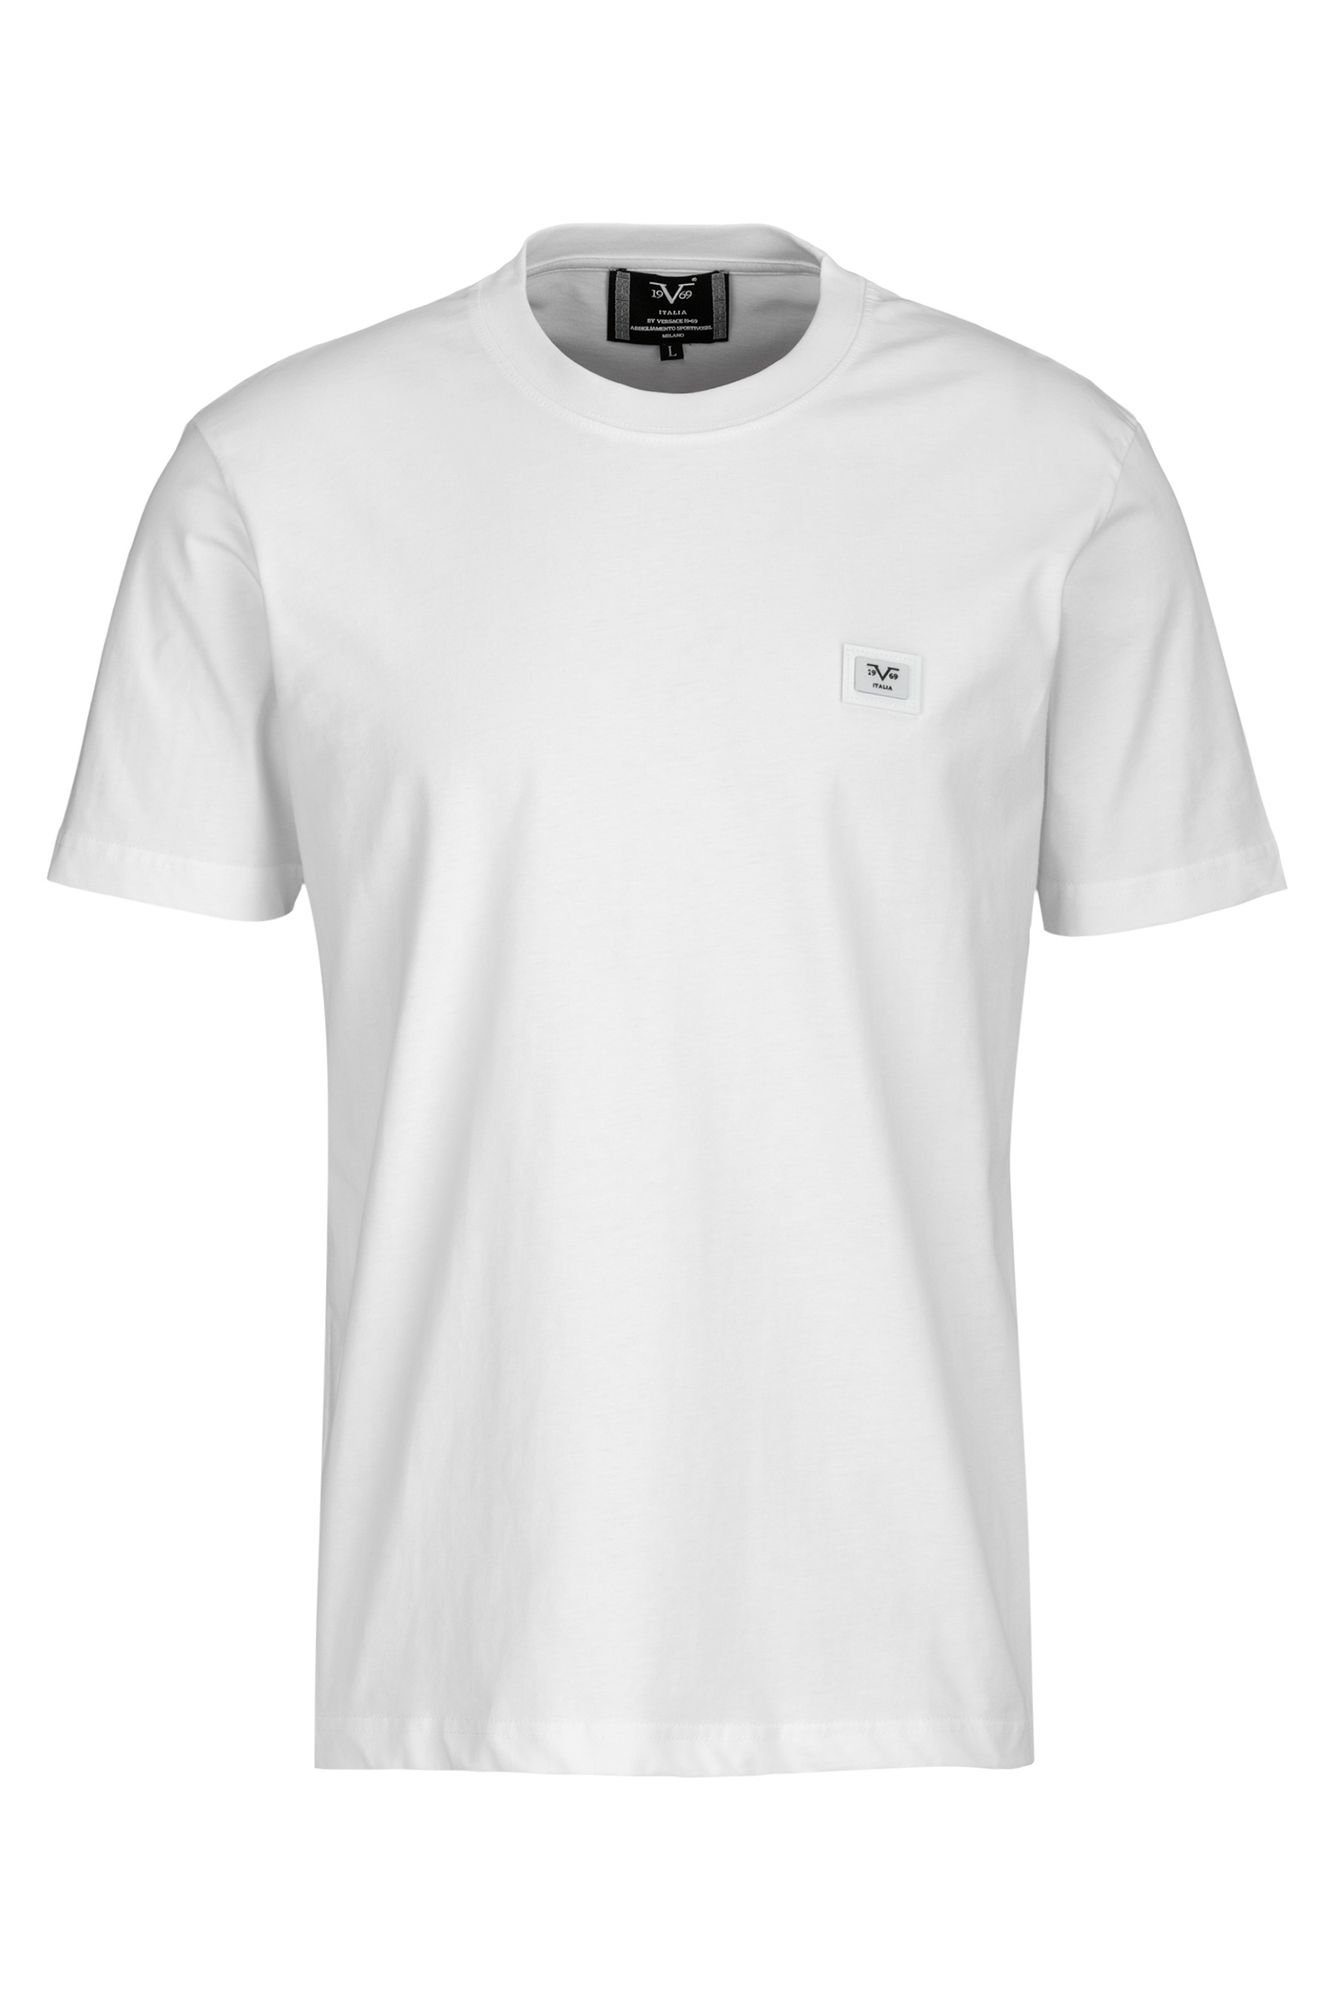 19V69 Italia by Versace T-Shirt Andy